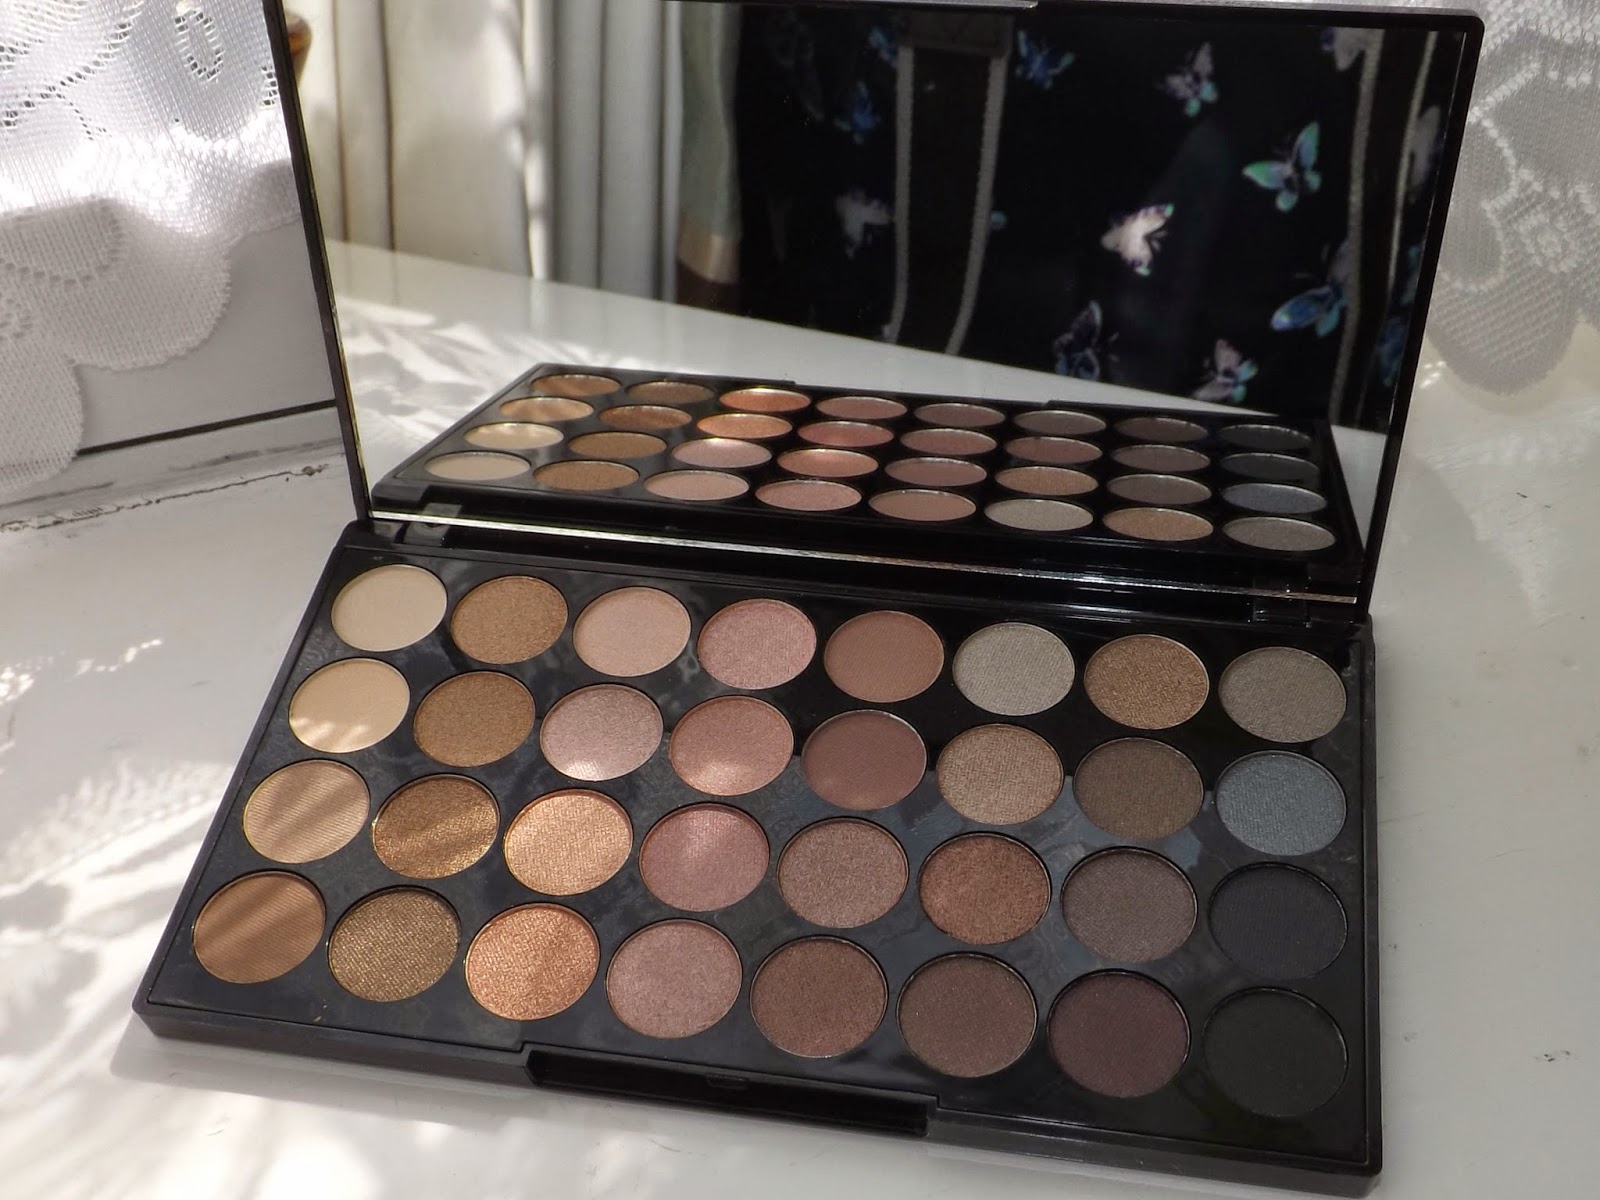 Beyond Flawless Ultra Palette Review and Tutorial